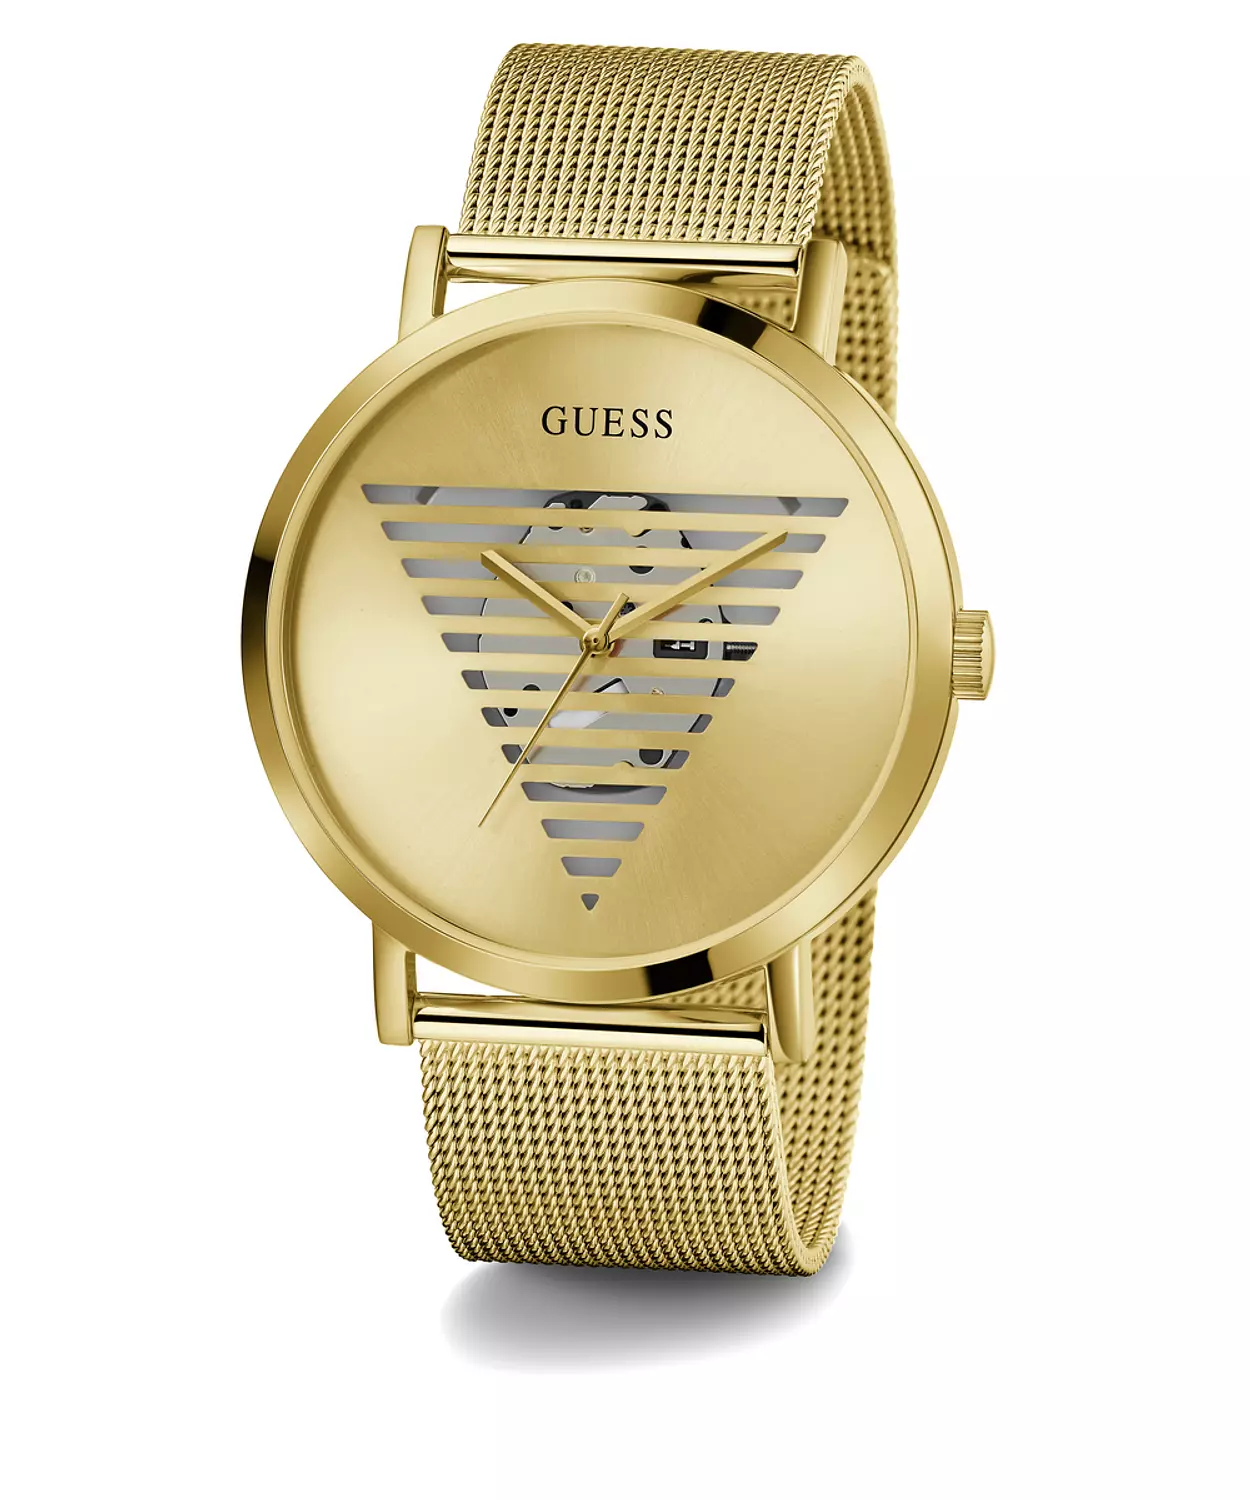 GUESS GW0502G1 ANALOG WATCH For Men Round Shape Gold Stainless Steel/Mesh Polished Bracelet 1